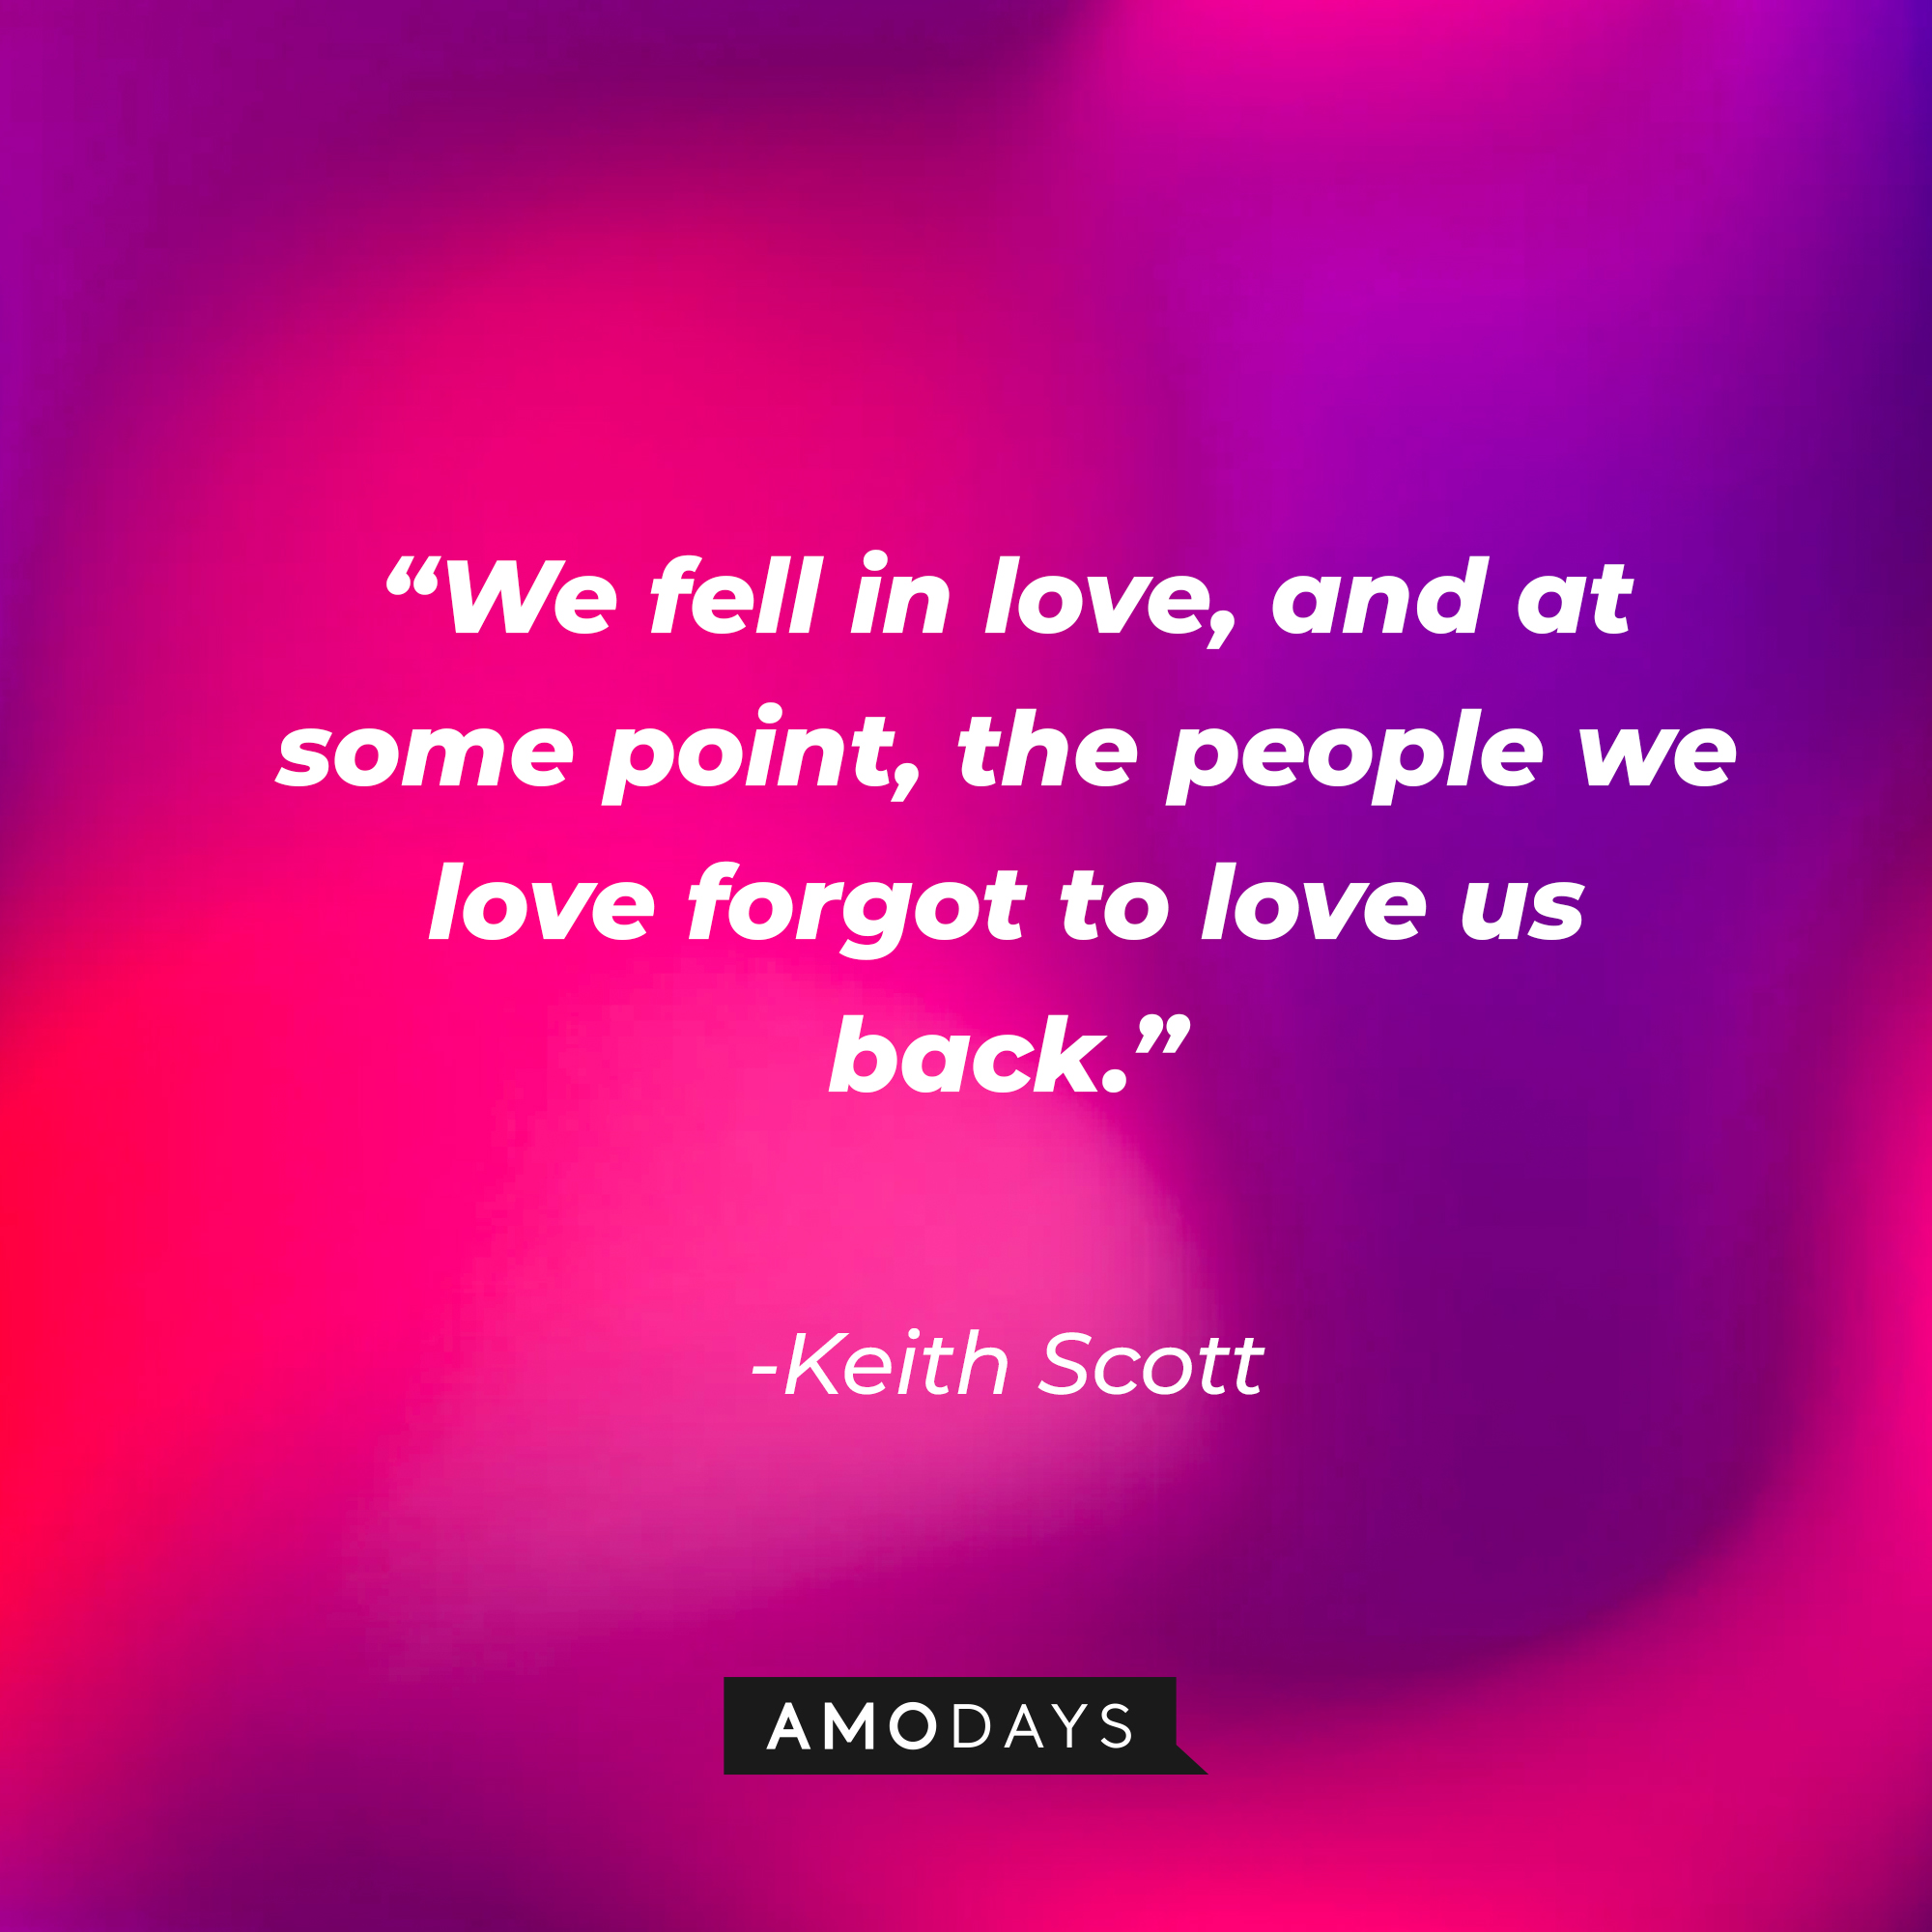 Keith Scott’s quote: “We fell in love, and at some point, the people we love forgot to love us back." | Source: AmoDays